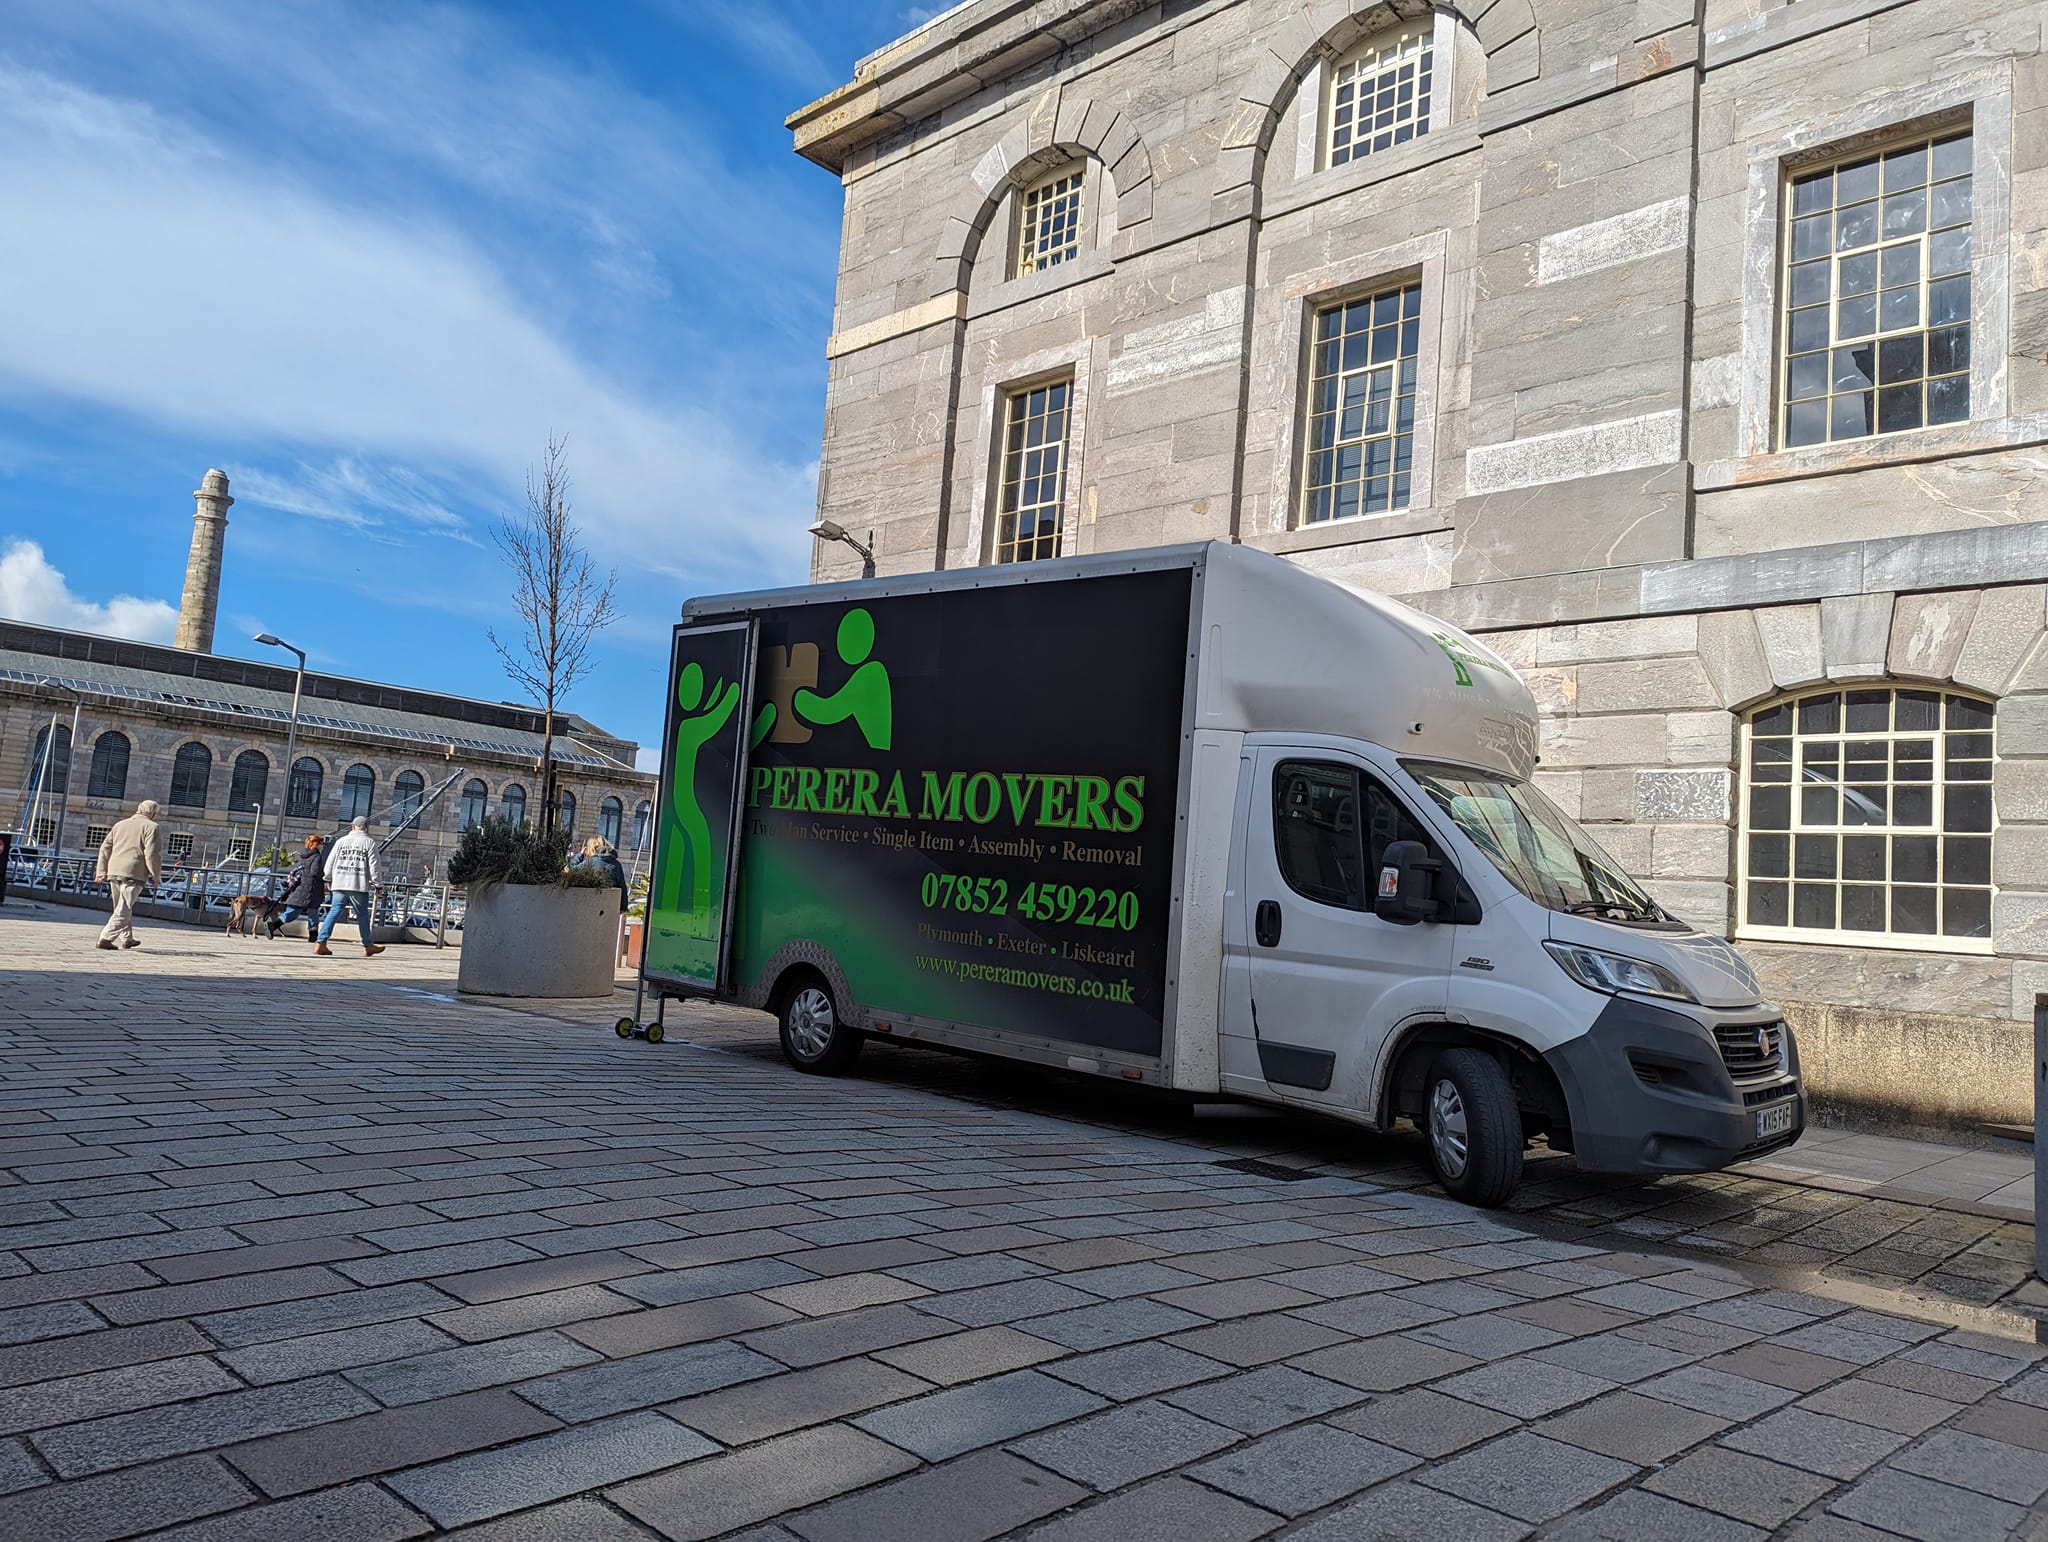 PERERA Movers Local Movers in Plymouth